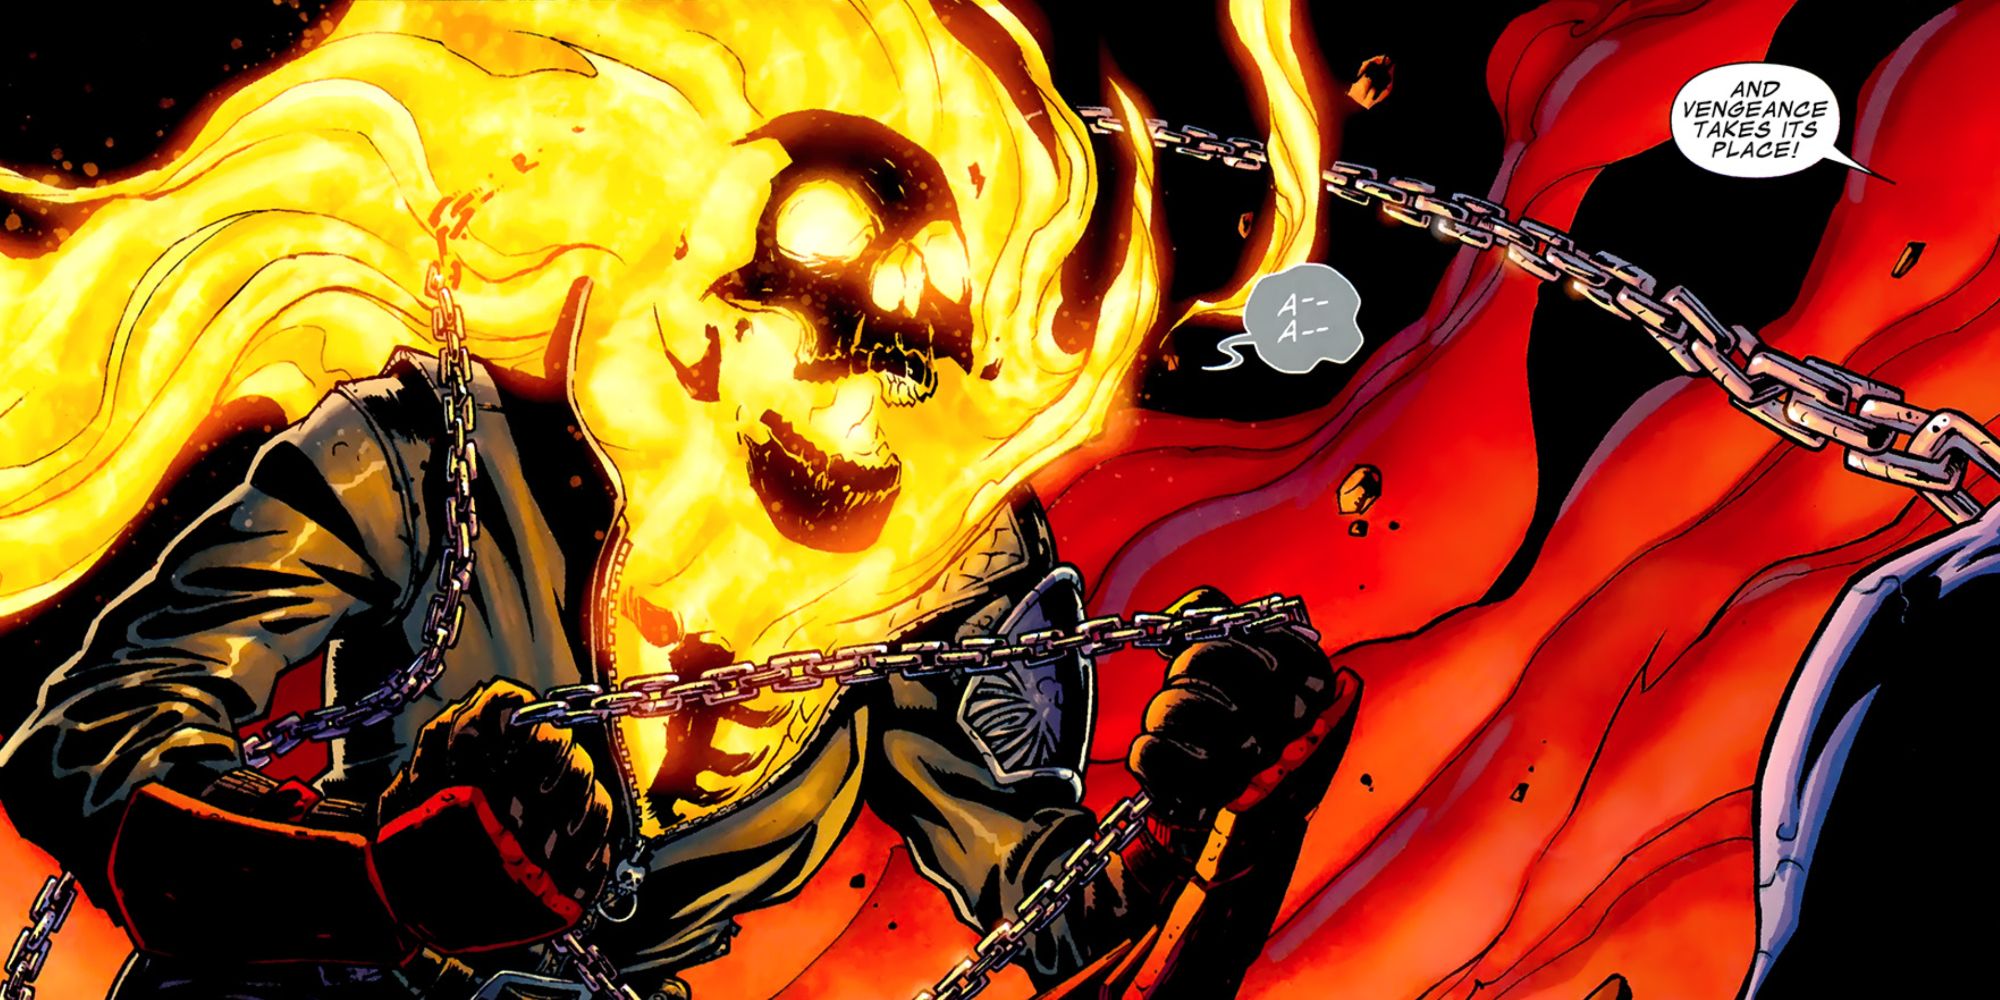 is ghost rider really that powerful